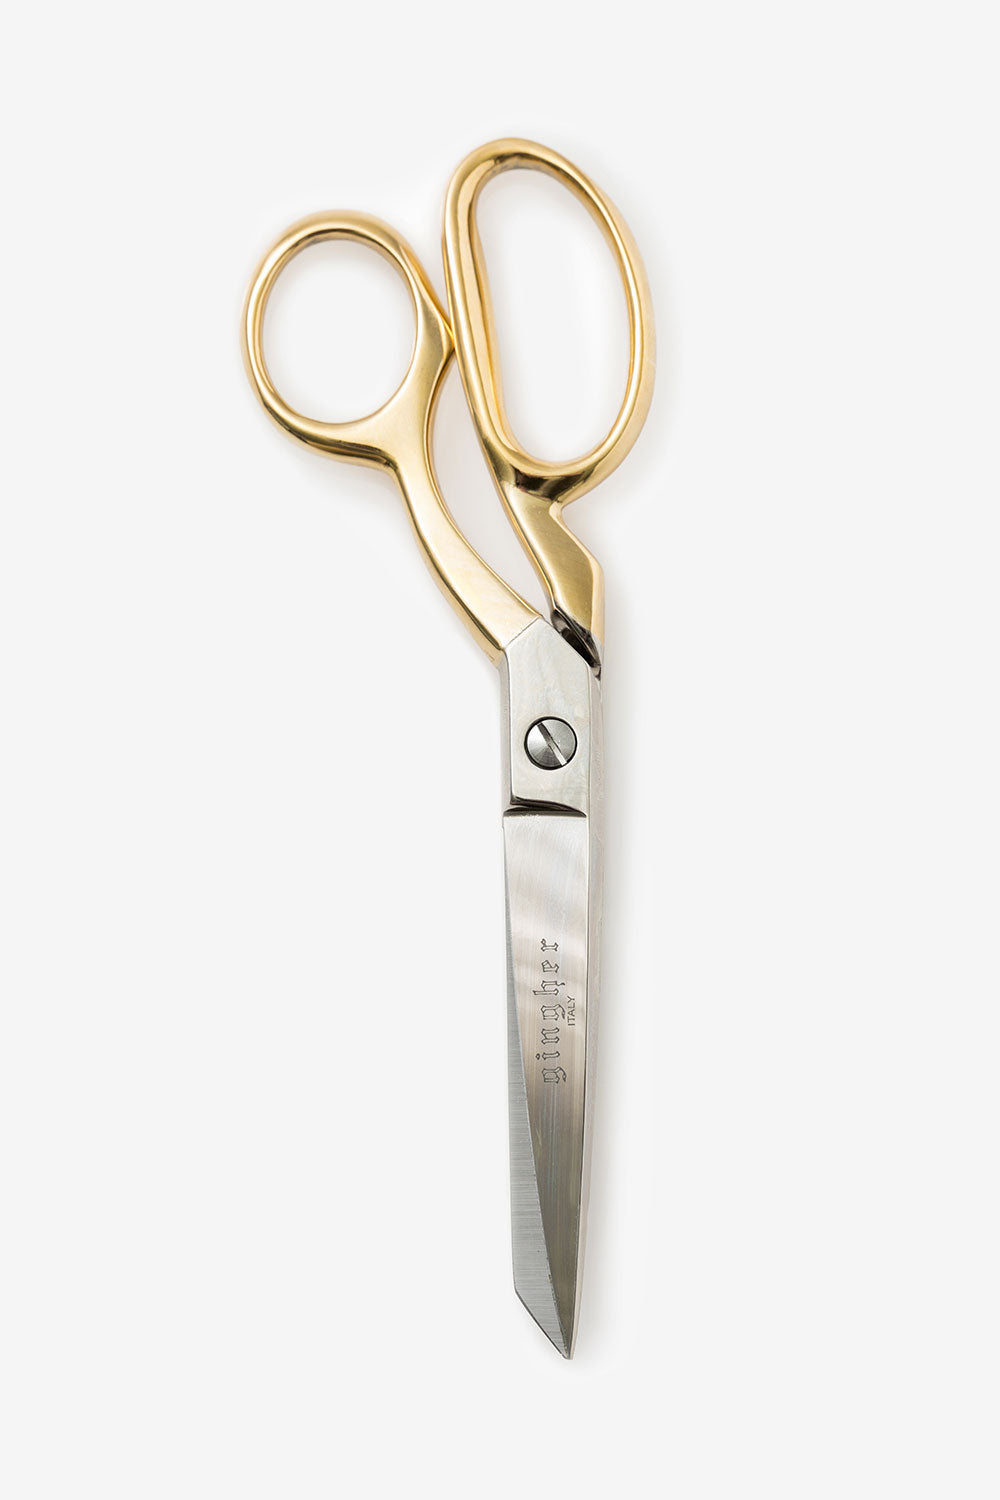 Gold Fabric, Dressmaking Scissors 8 Made in Italy